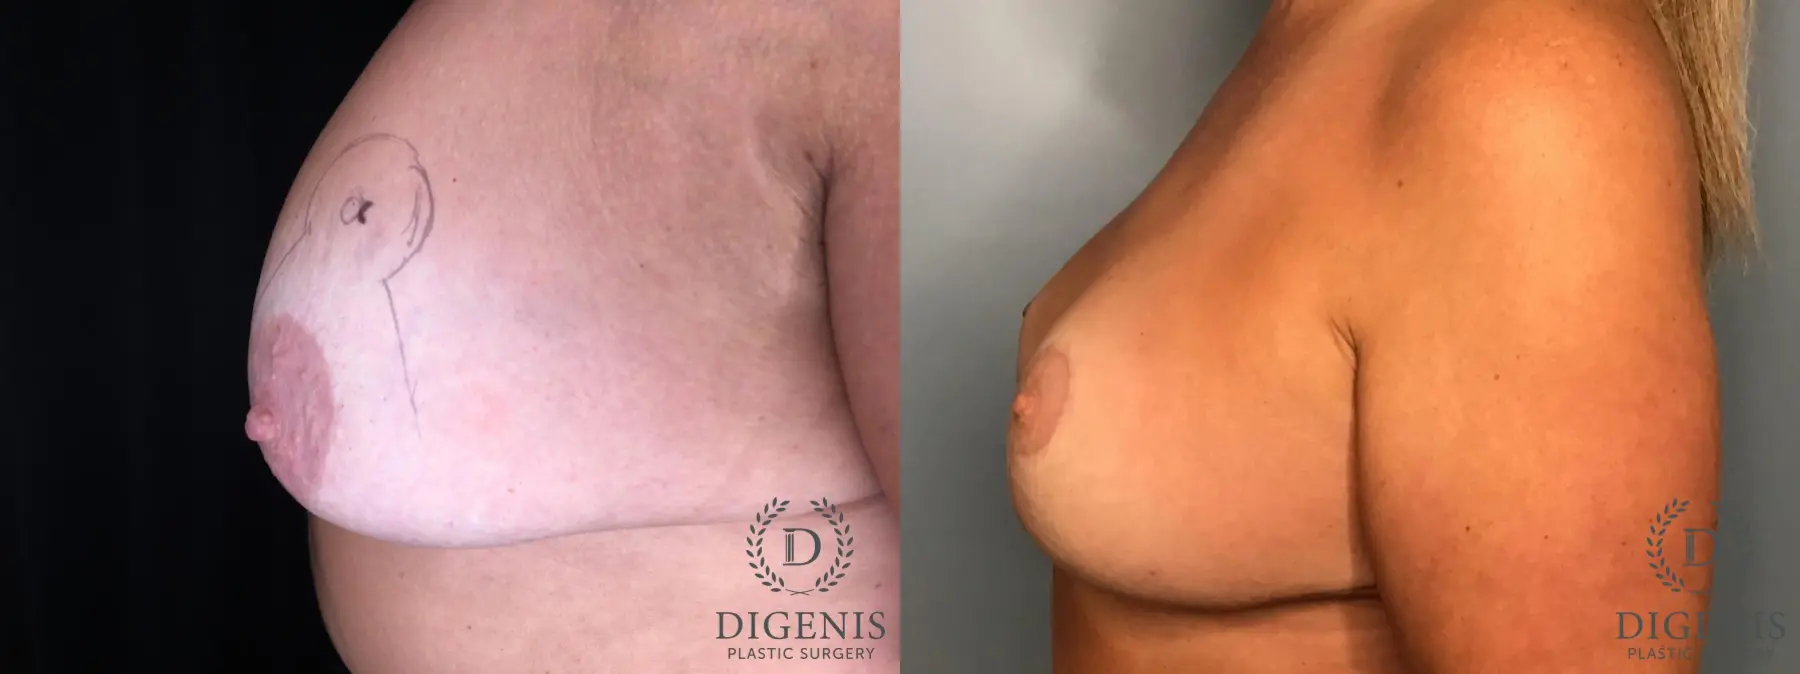 Mastopexy: Patient 2 - Before and After 3